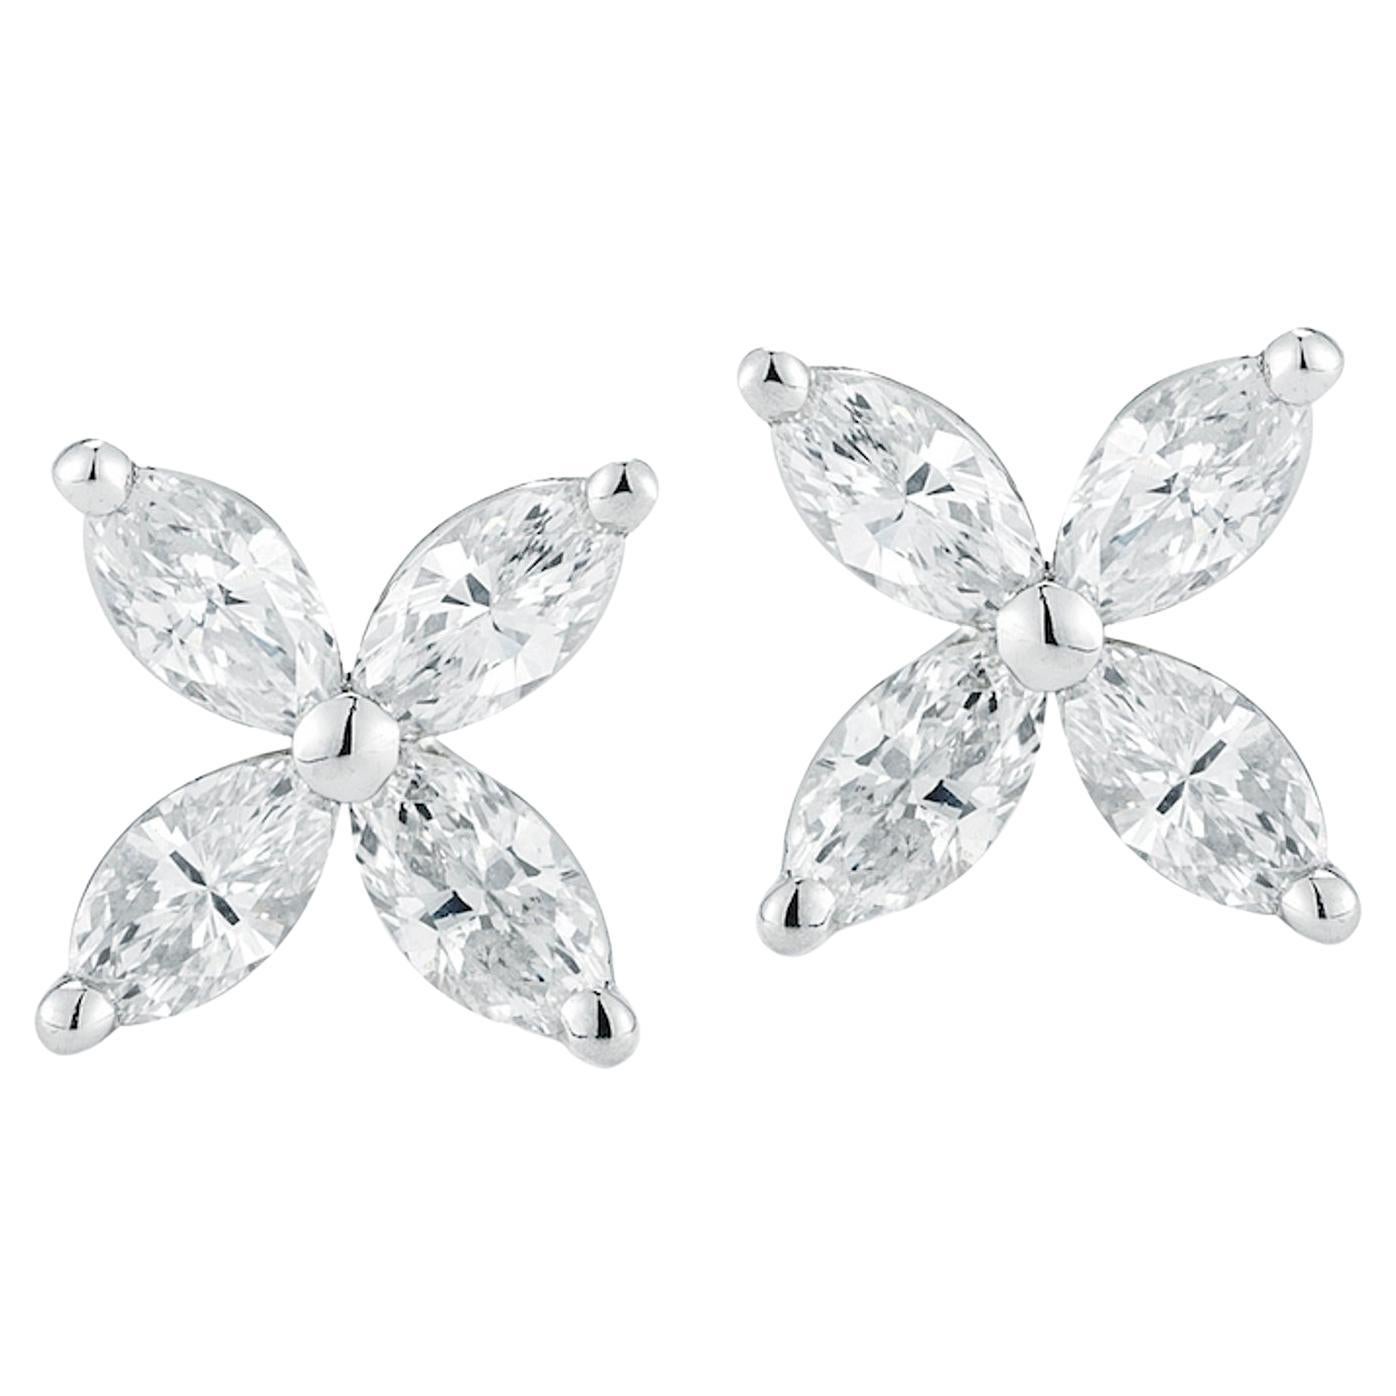 The classic arrangement of 8 stunning Marquise diamonds makes these studs an instant classic. These studs are crafted out of durable 18K white gold and set with 8 high-quality, finely cut Marquise diamonds in a floral arrangement. A simple yet